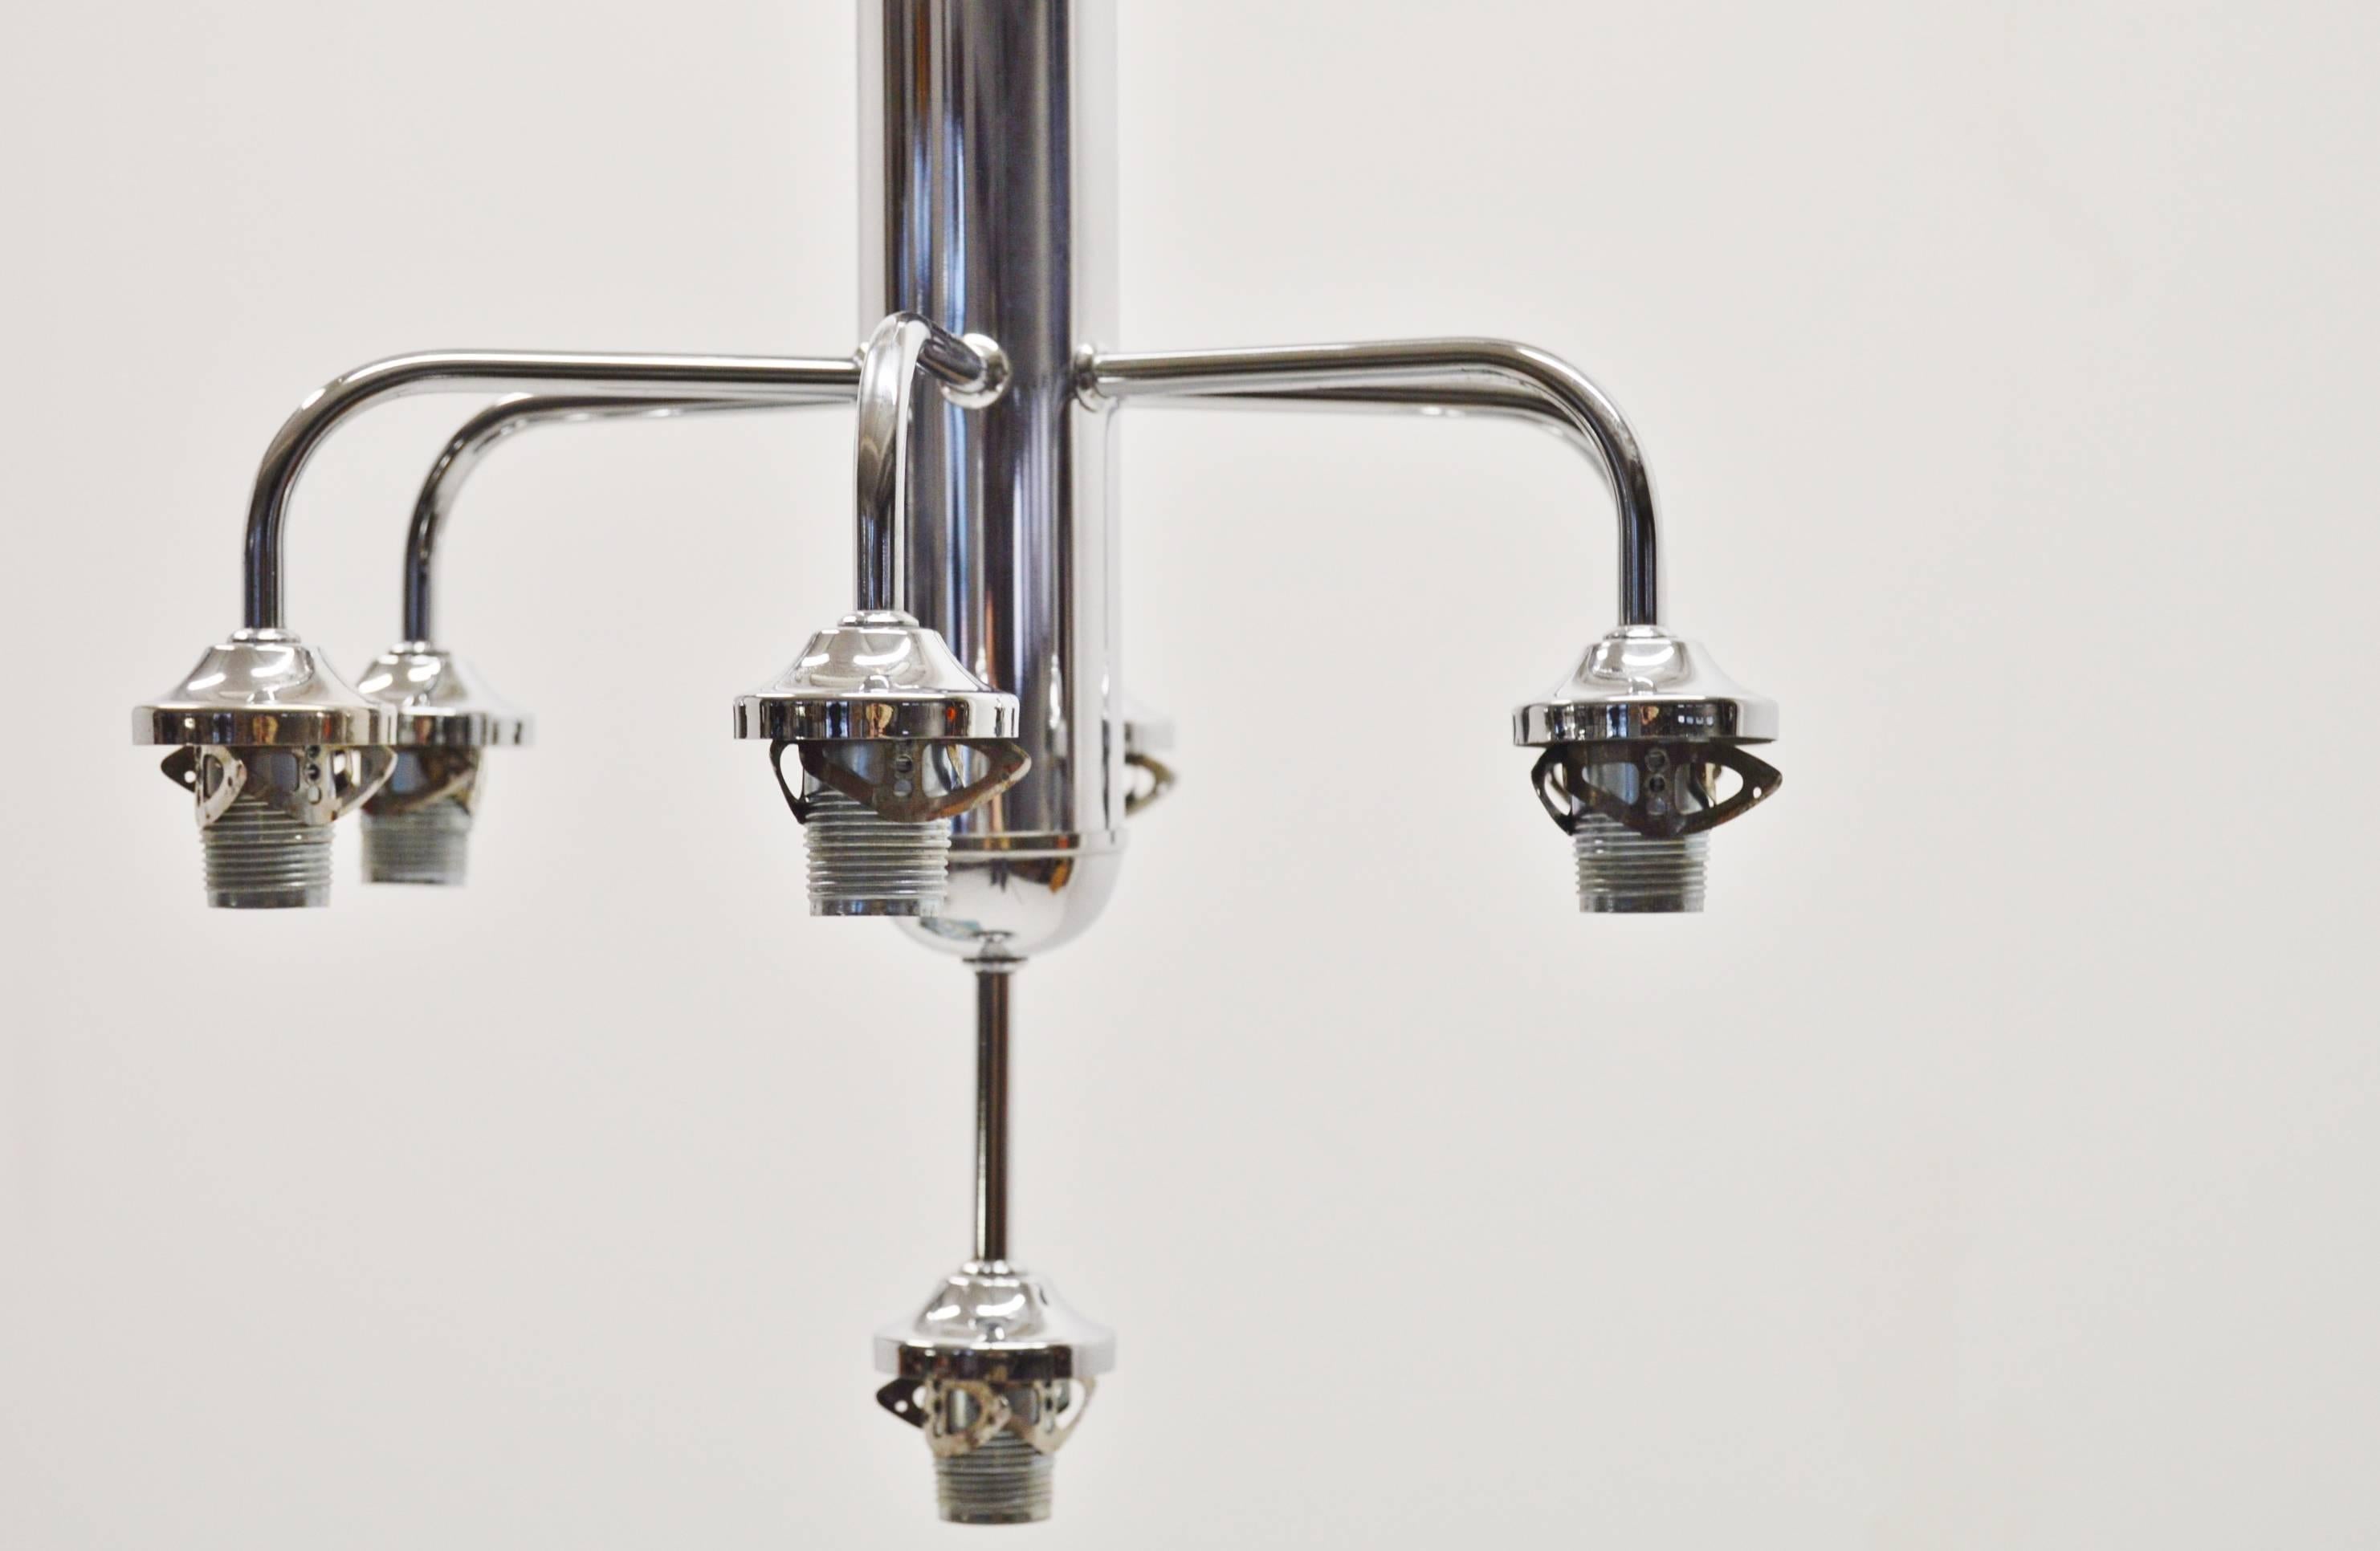 Seven-Arm Art Deco Ceiling Lamp in Chrome and Glass 1